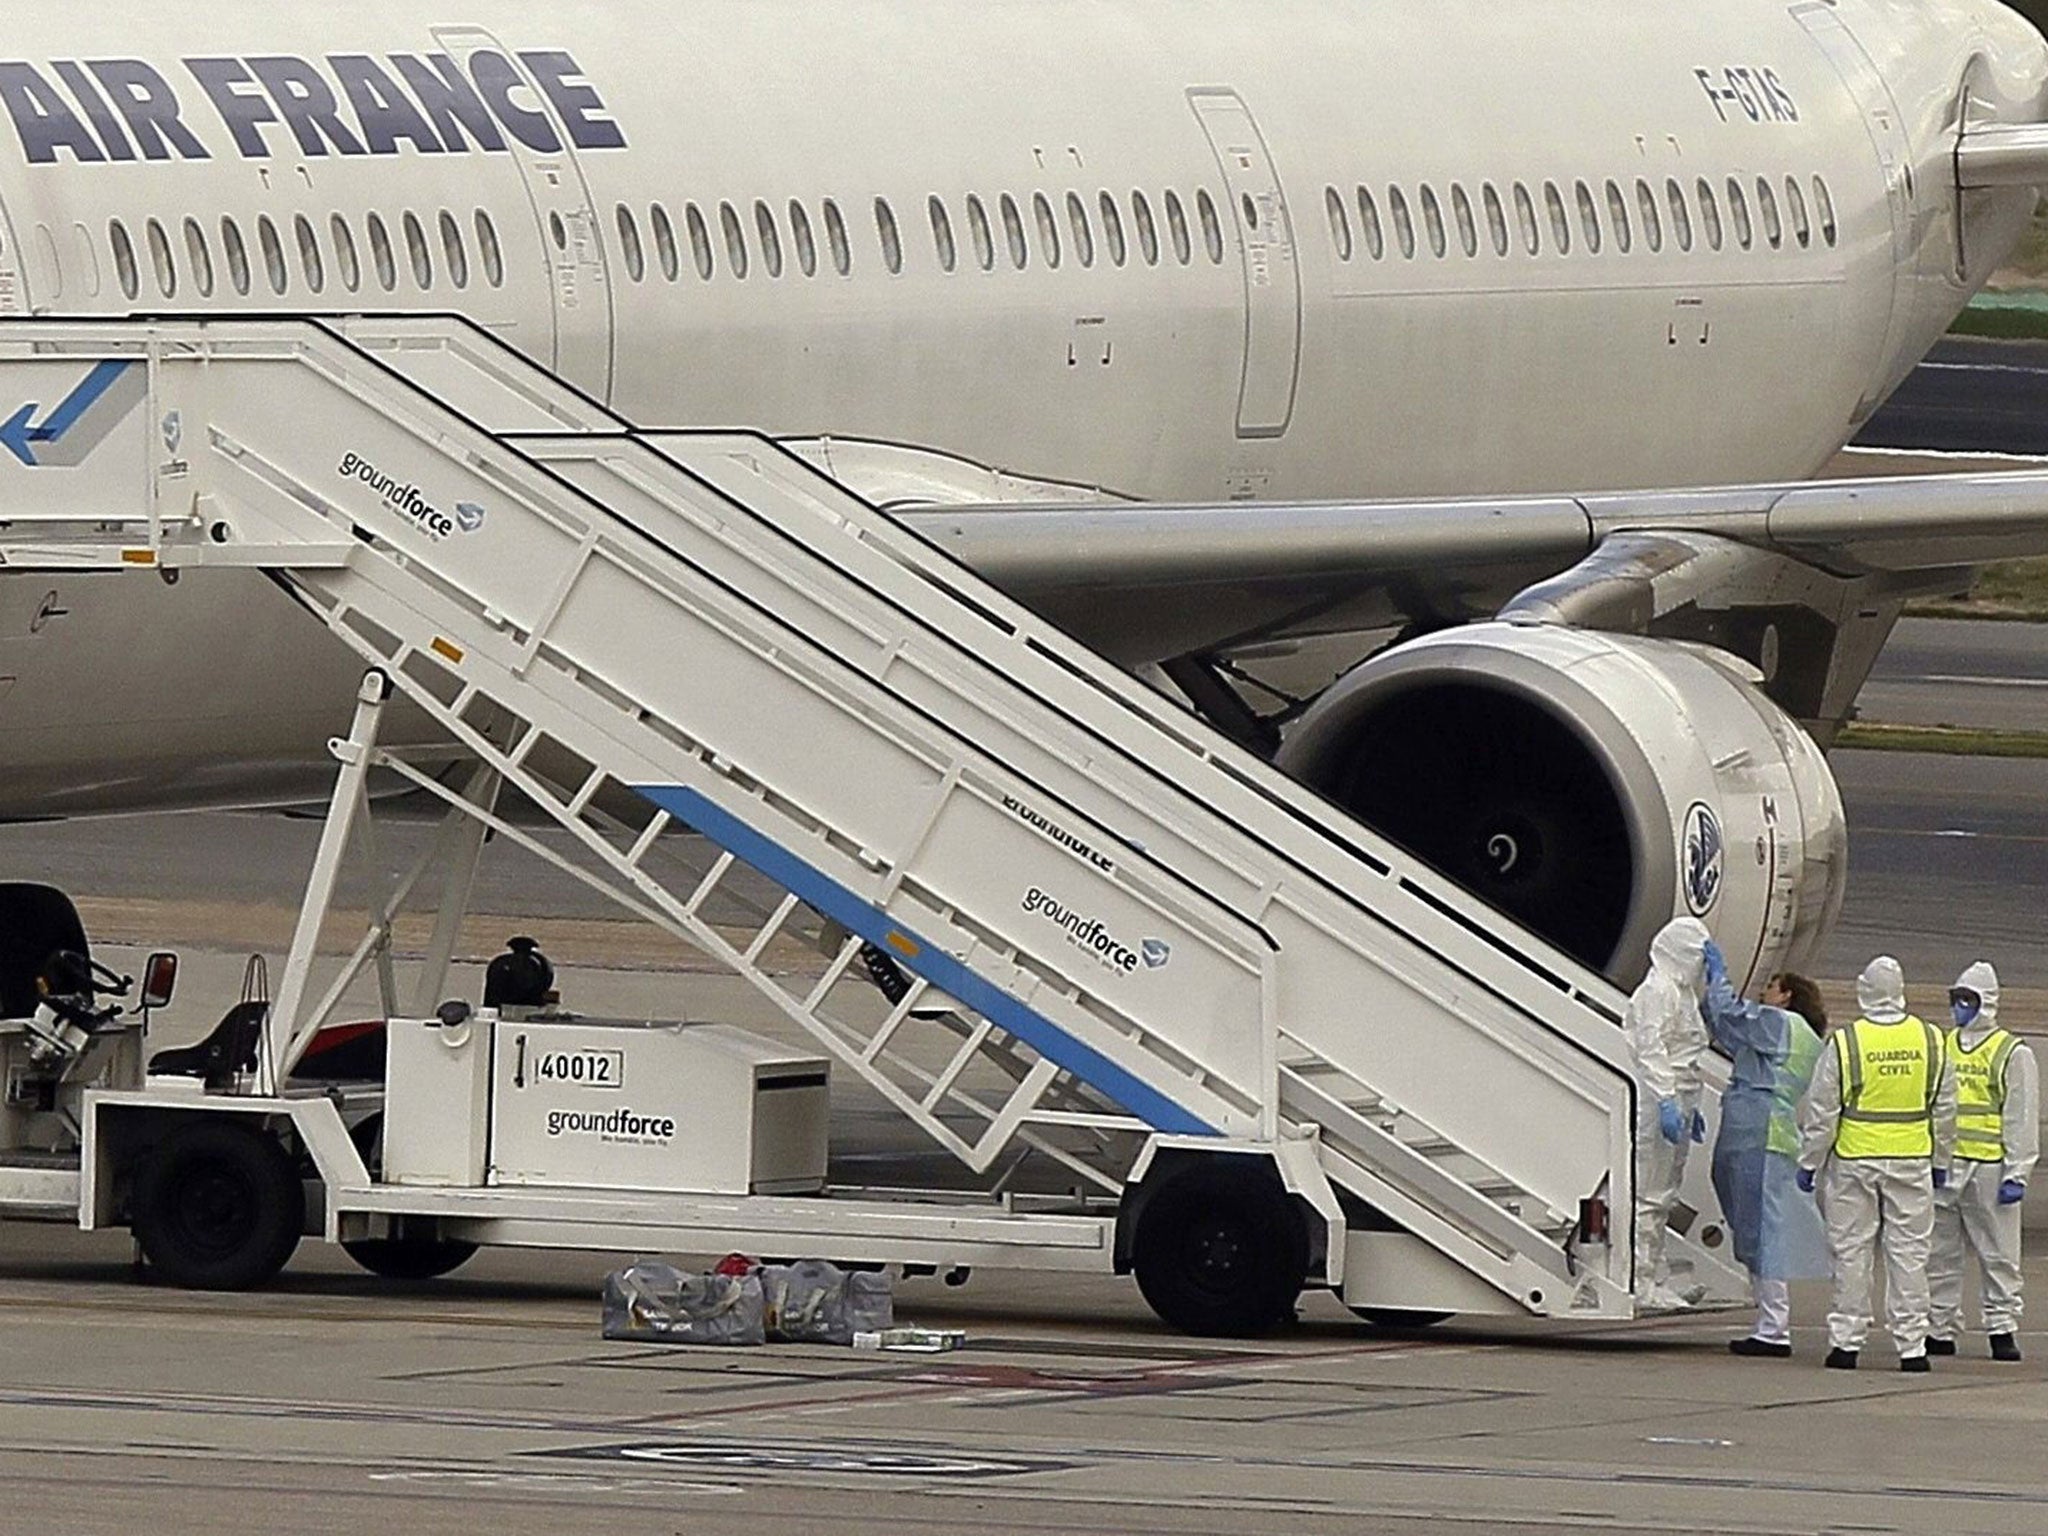 Medical staff wearing protection suits stand next to the Air France Airbus A321 which landed at Barajas International Airport